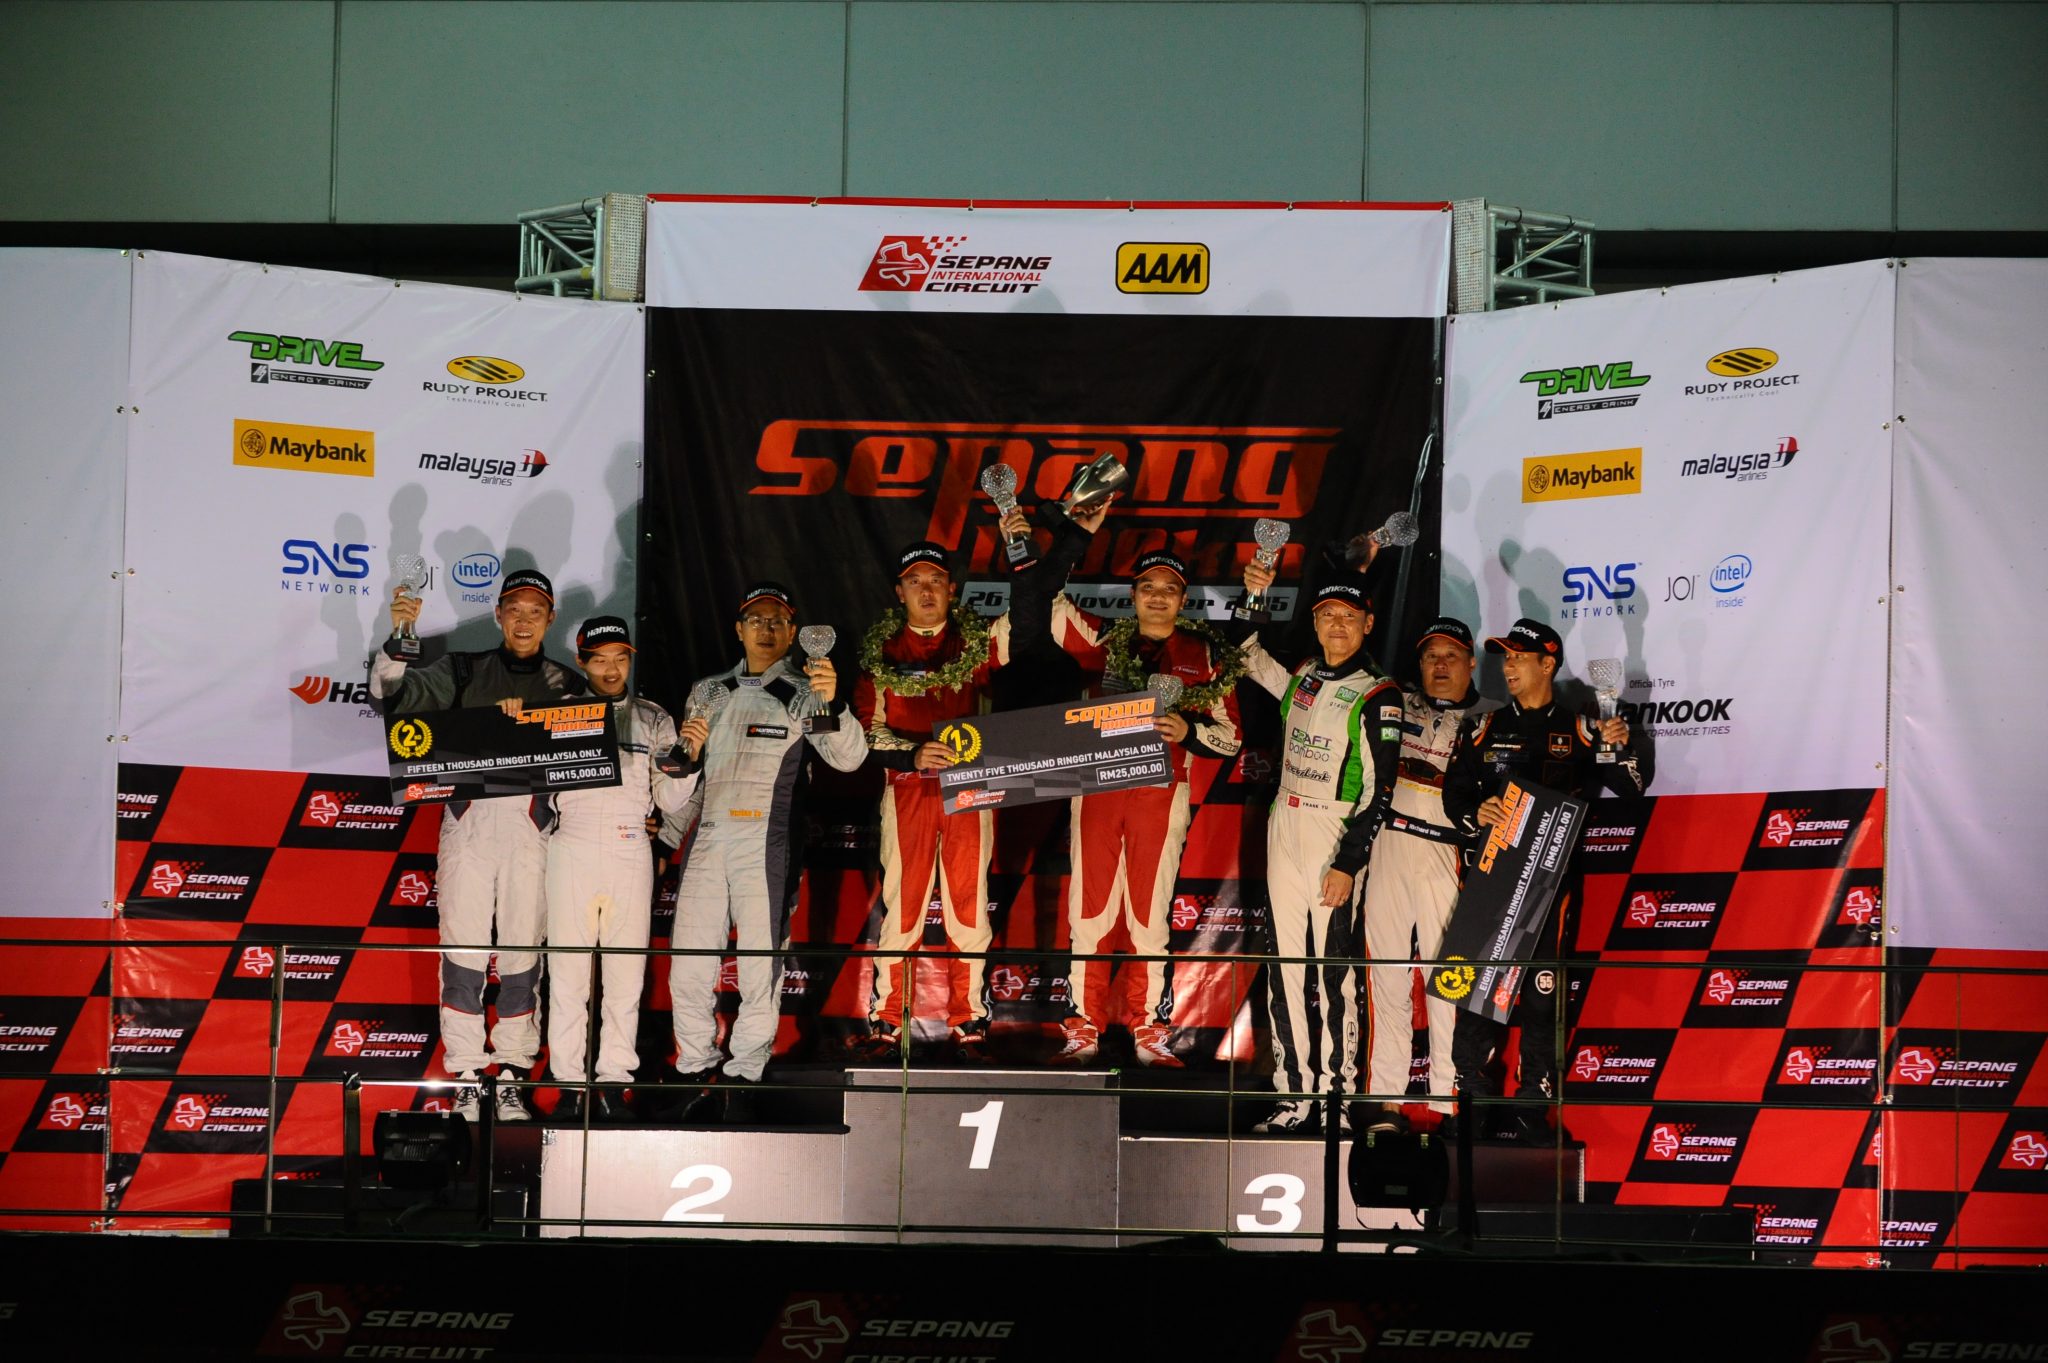 Professional HMRT drivers Aaron Lim and Farriz Fauzy cruised to victory